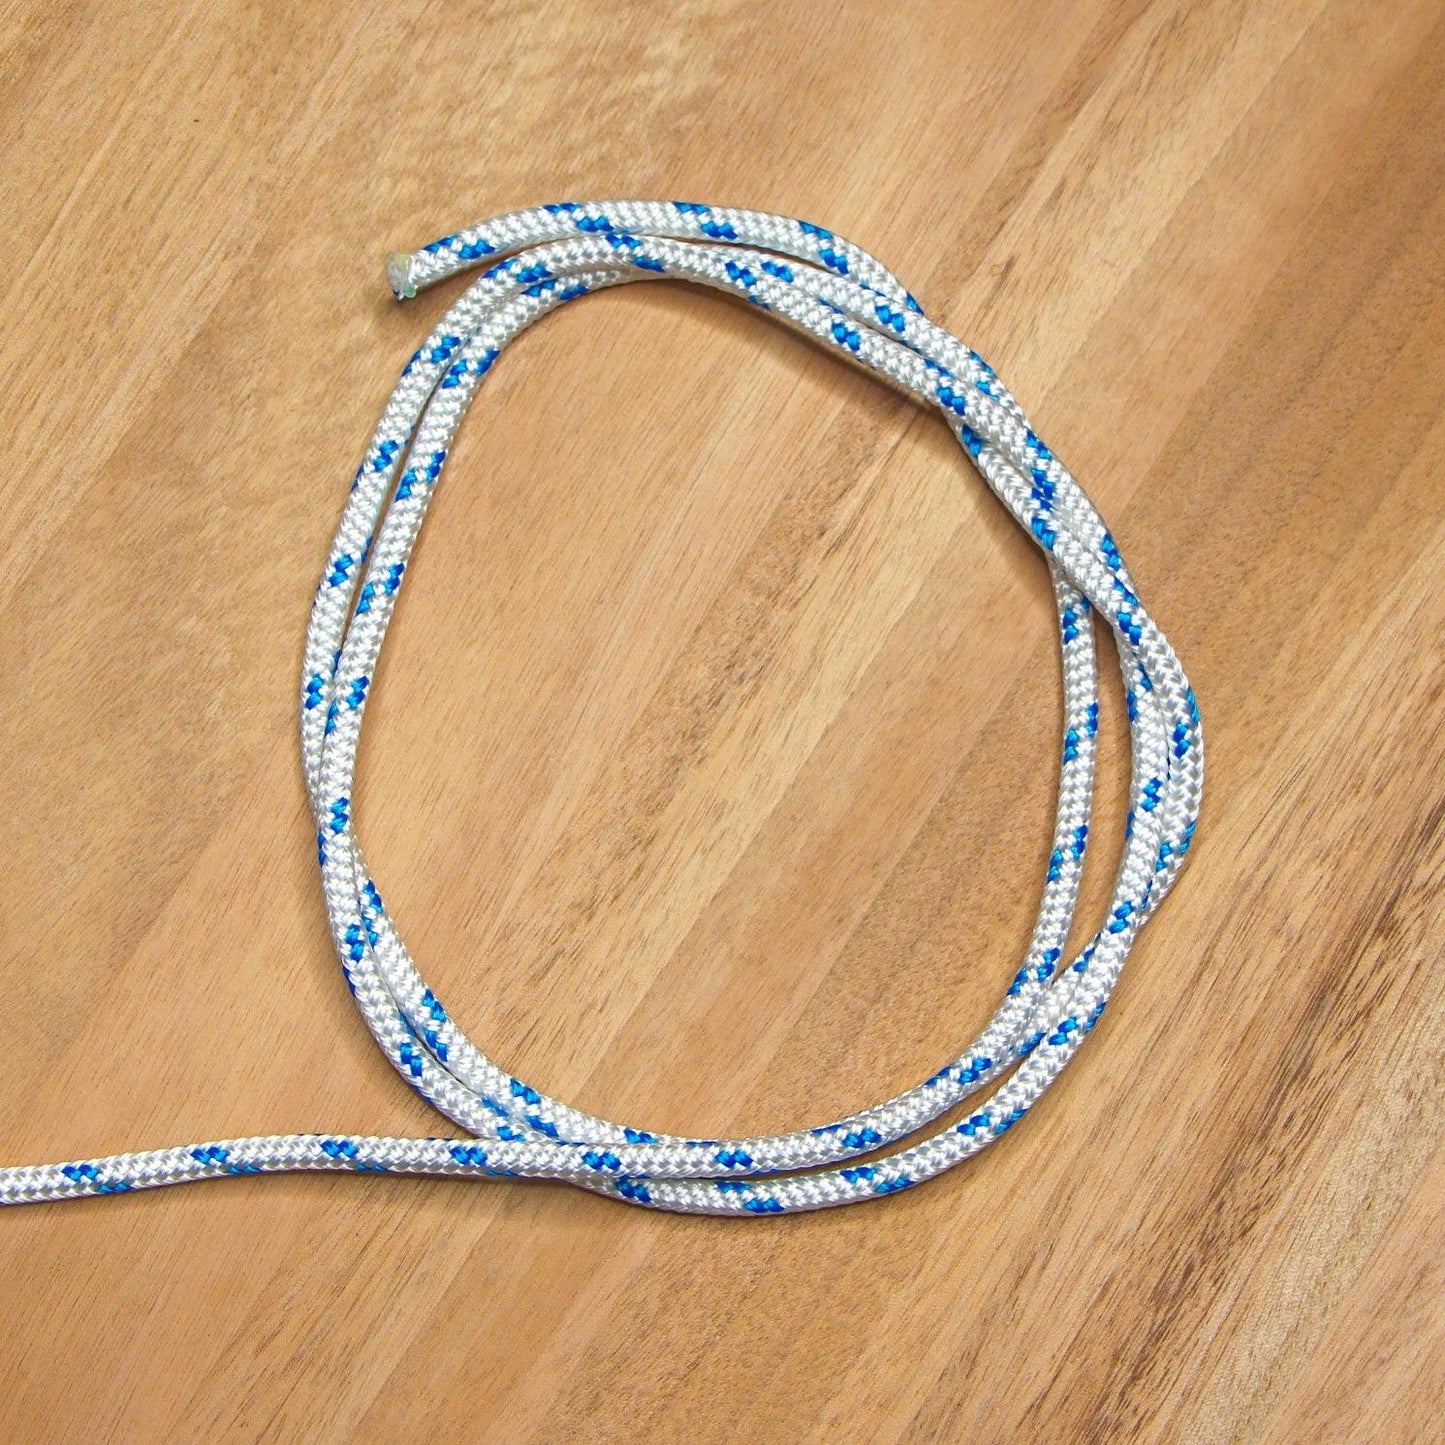 Marine Rope - White & Blue fleck - 8mm - Cams Cords